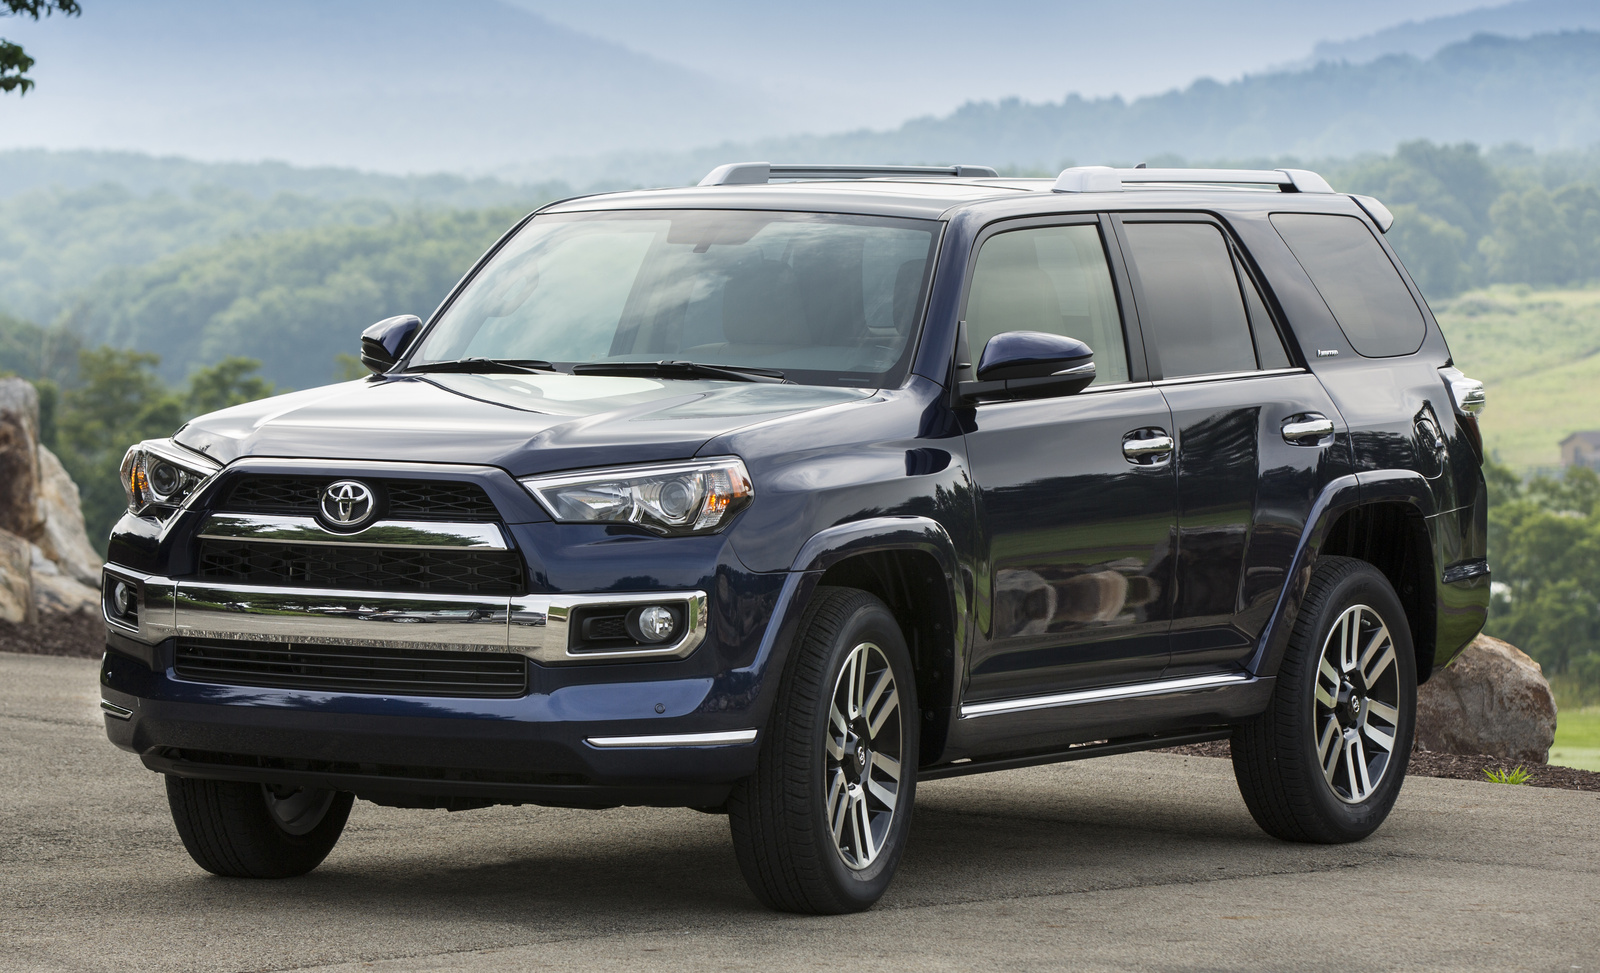 2016 / 2017 Toyota 4Runner for Sale in your area - CarGurus